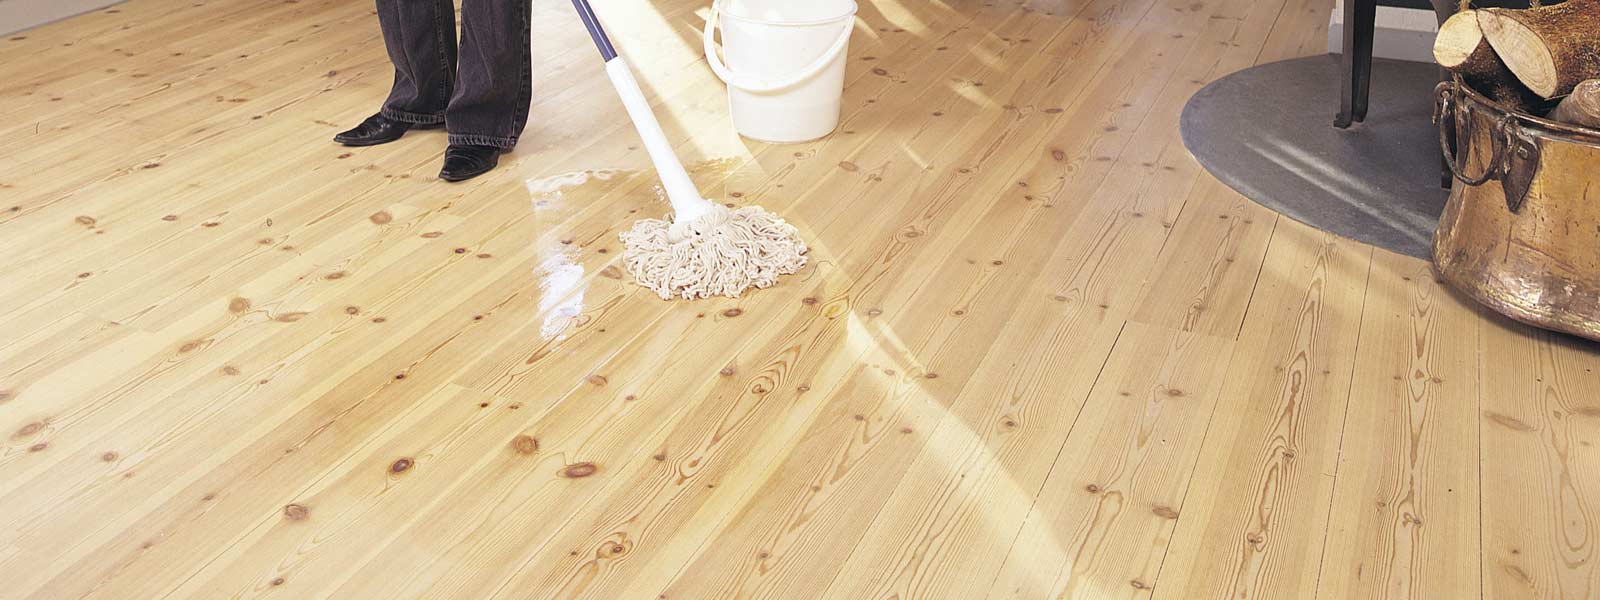 Cleaning floors